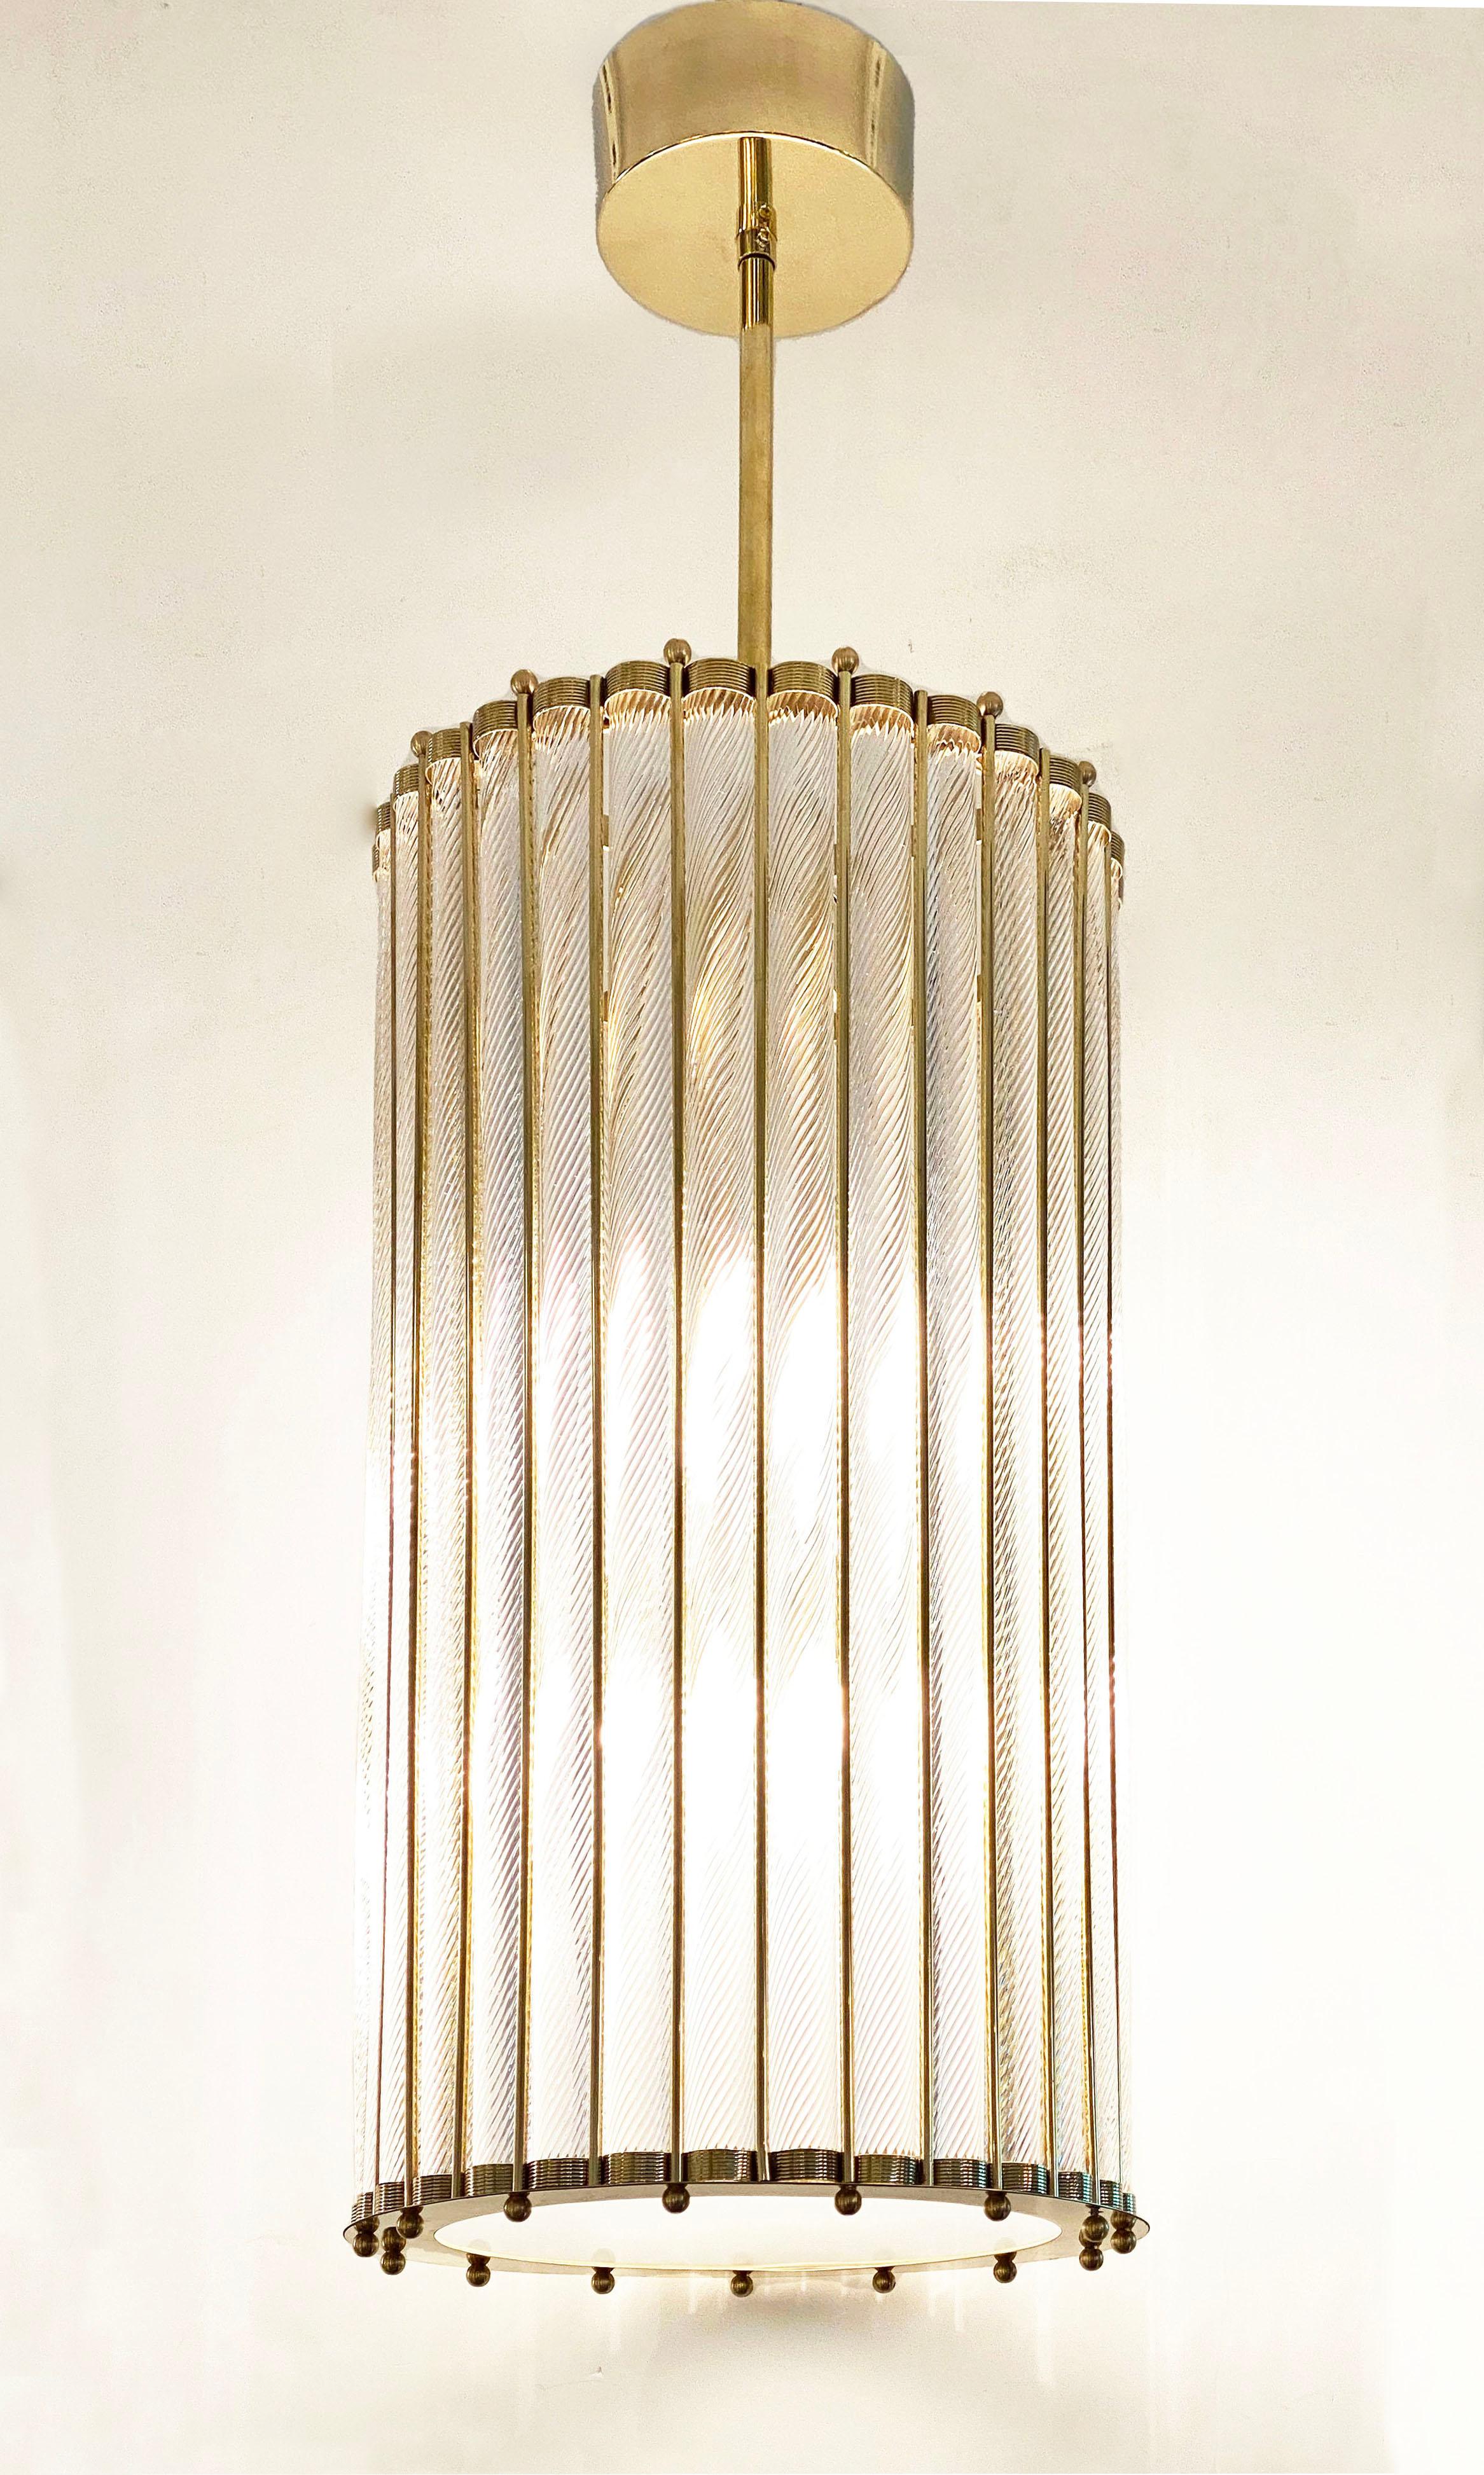 Monumental contemporary Italian Art Deco Design round lantern / chandelier, entirely hand crafted, customizable in height, diameter and finishes, the nicely scalloped airy brass structure supports crystal clear Murano glass rods worked with the